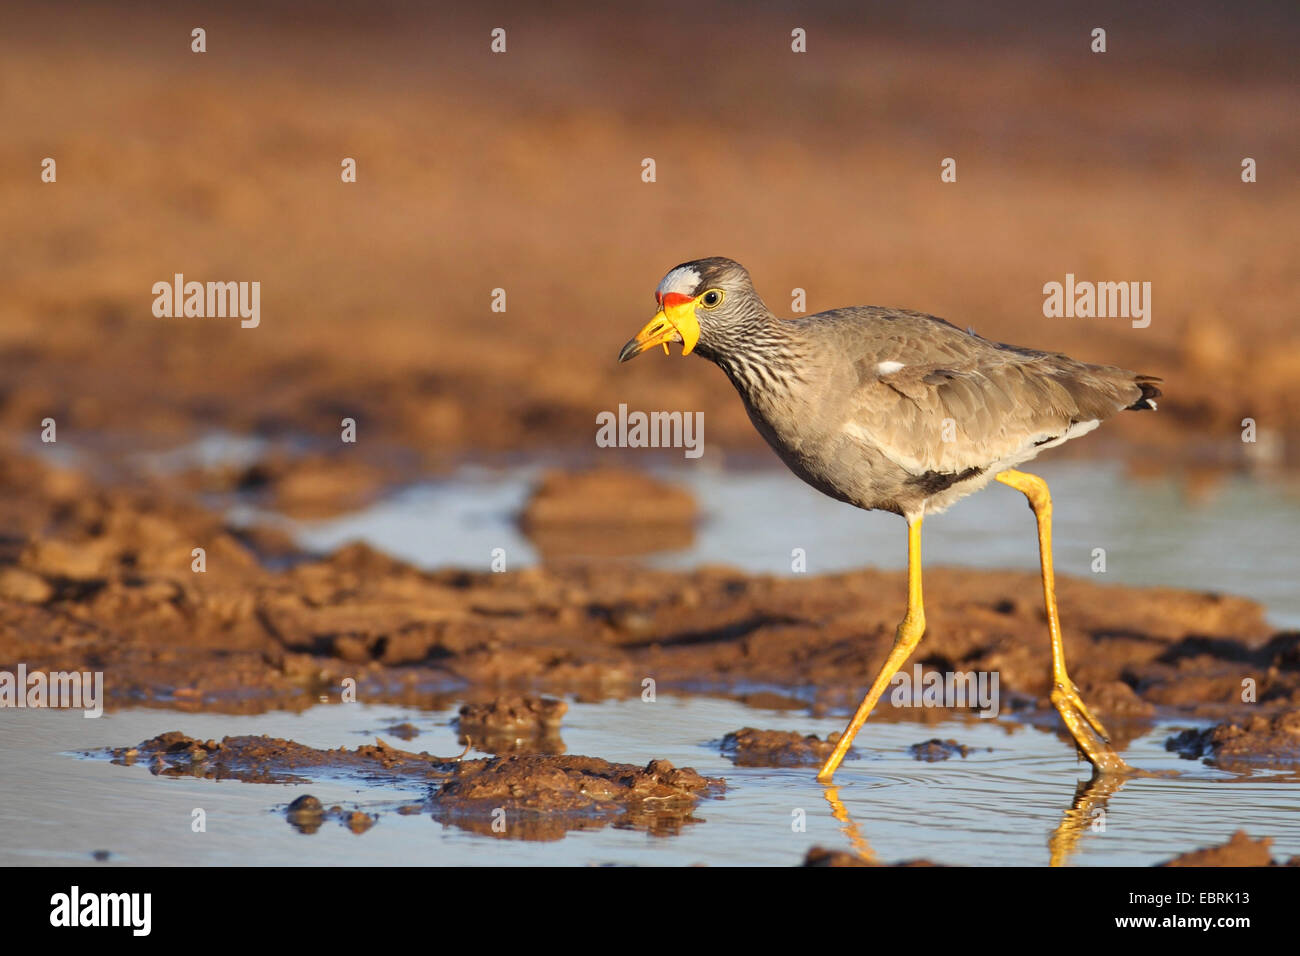 Senegal wattled plover (Vanellus senegallus), walks in shallow water, South Africa, North West Province, Pilanesberg National Park Stock Photo